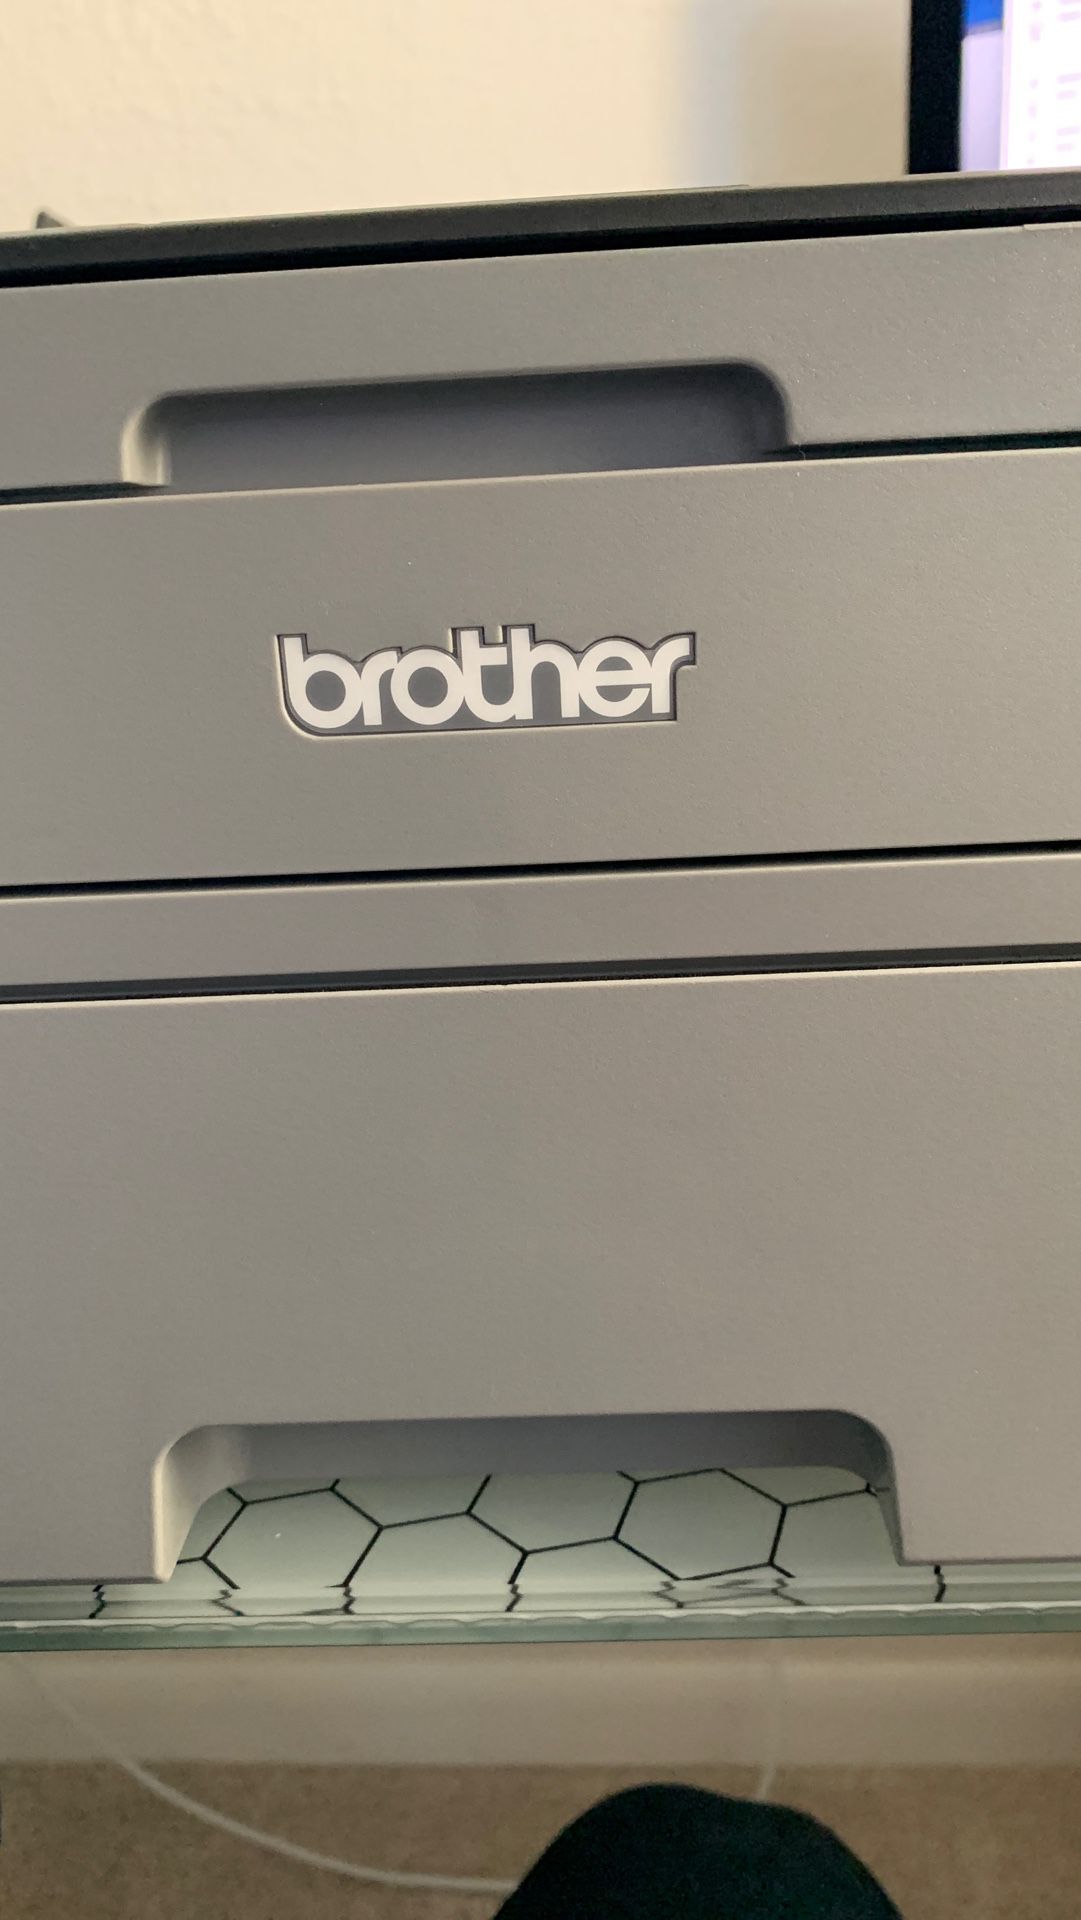 Brother Black and white Printer